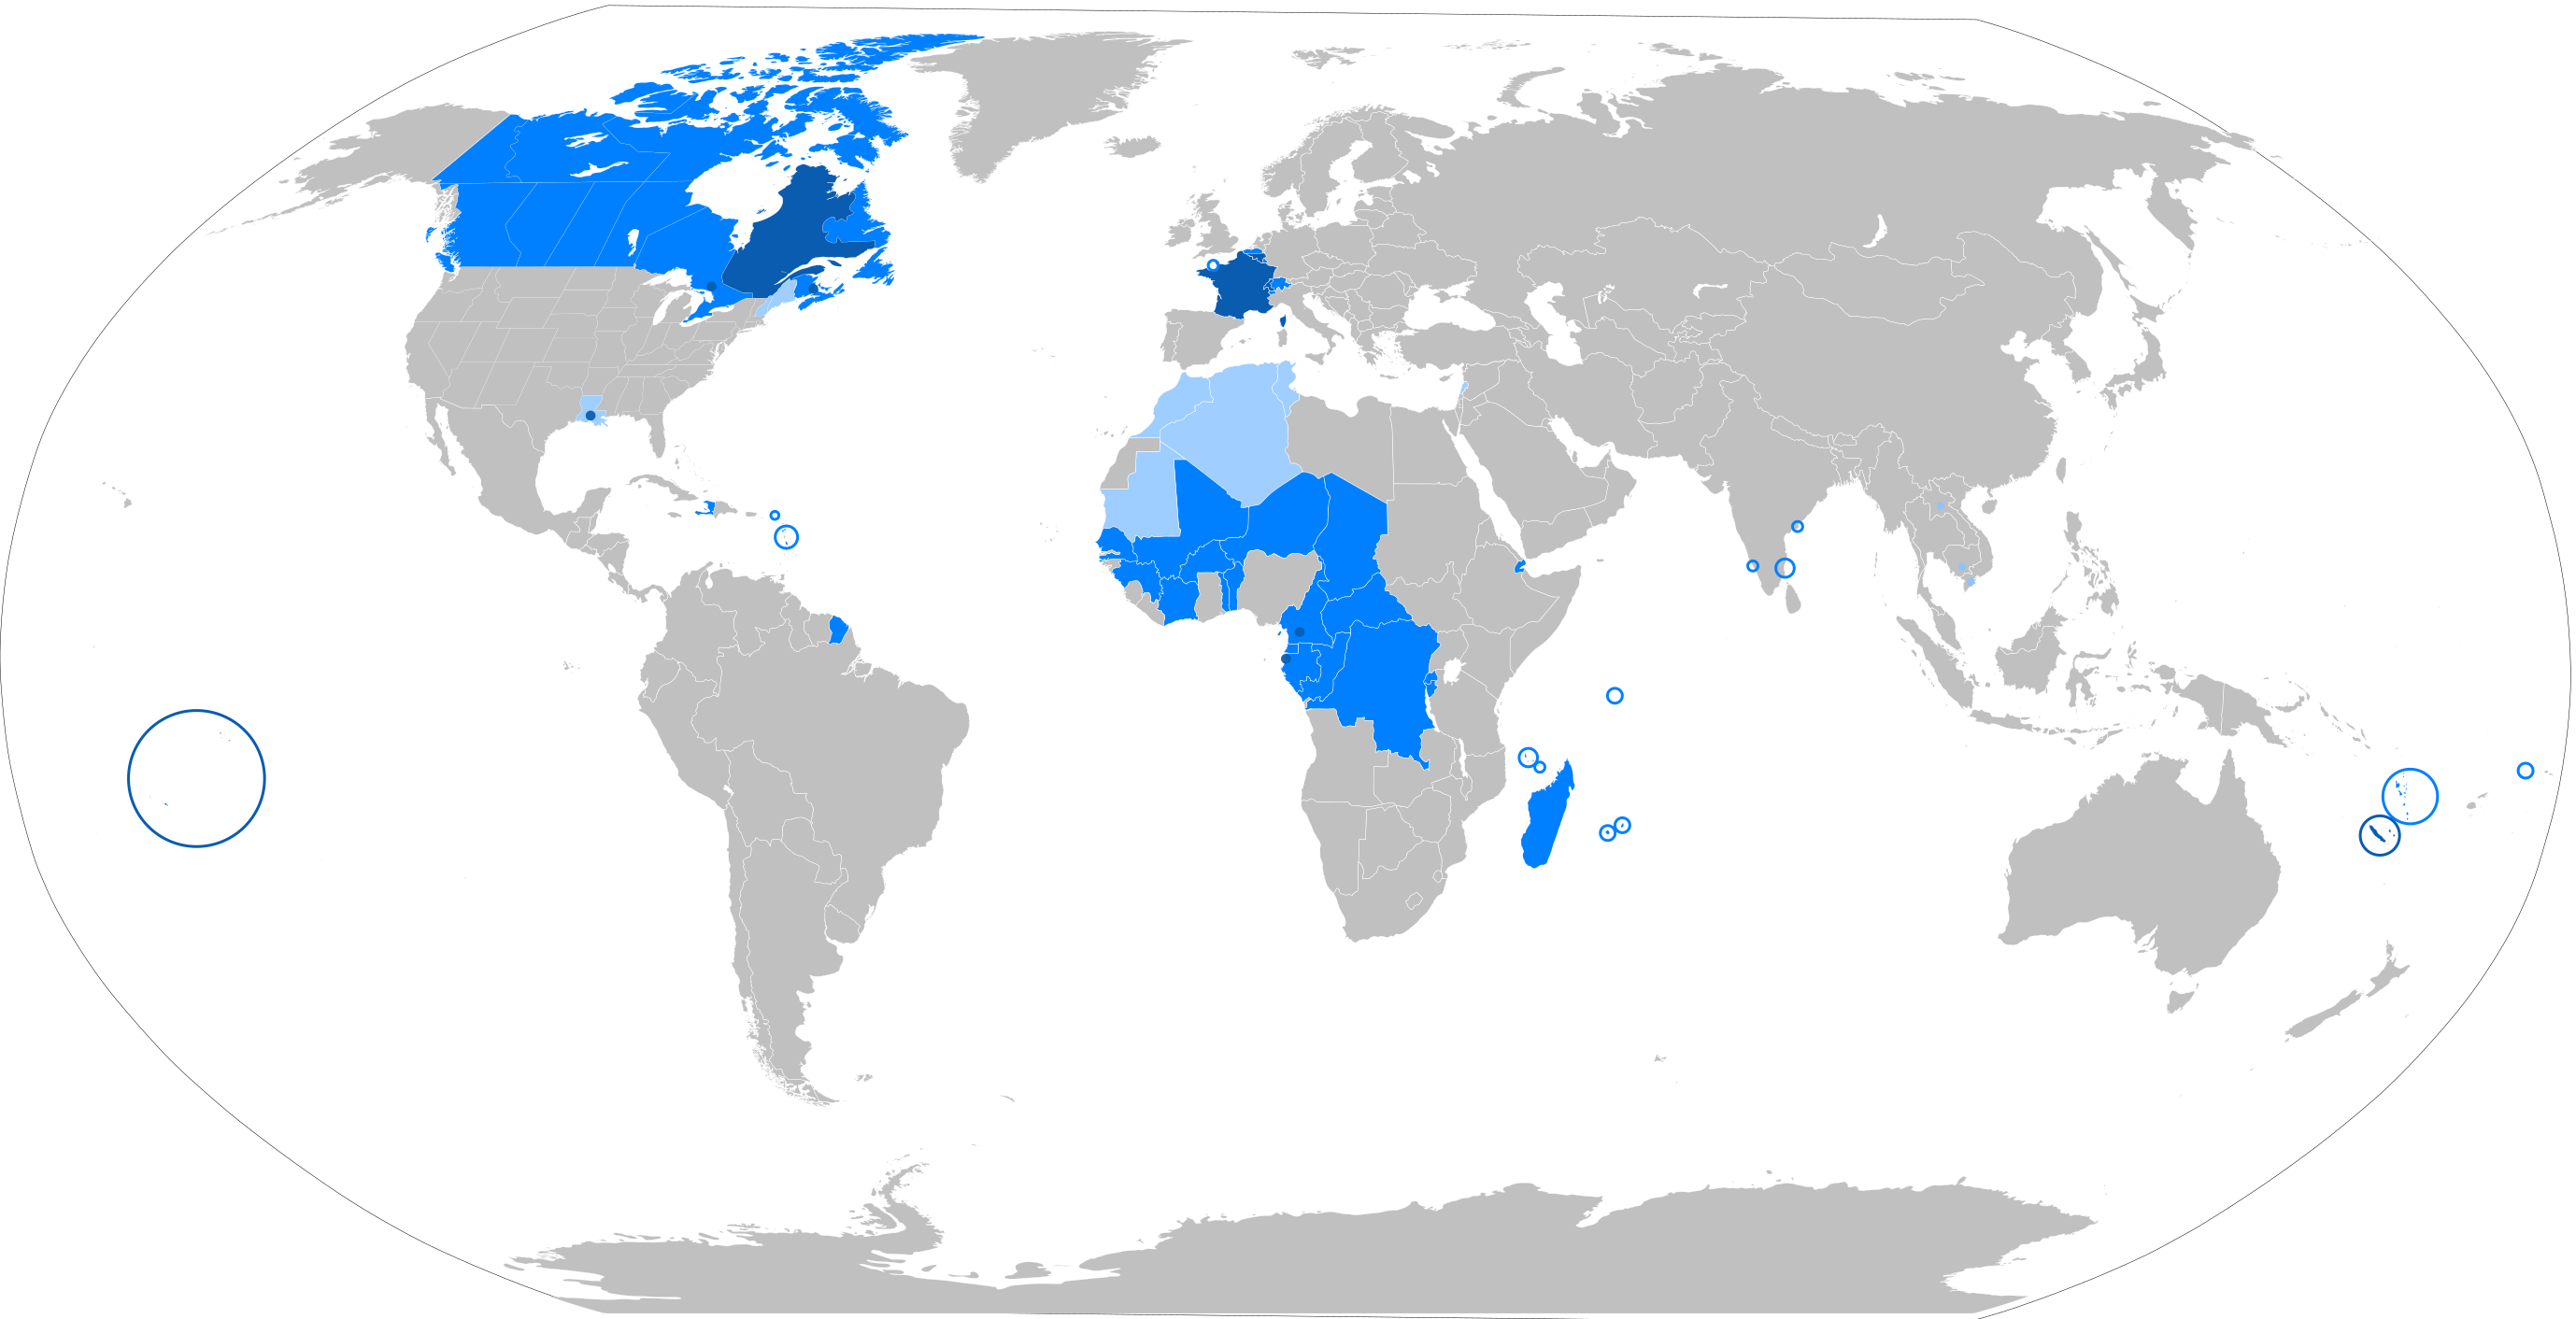 This world map shows the spread of French around the world. The depth of blue indicates the level of penetration of French into the country. In those countries which are not dark blue, French typically coexists alongside other, often majority, languages. The green squares represent linguistic minorities, typically in cities.